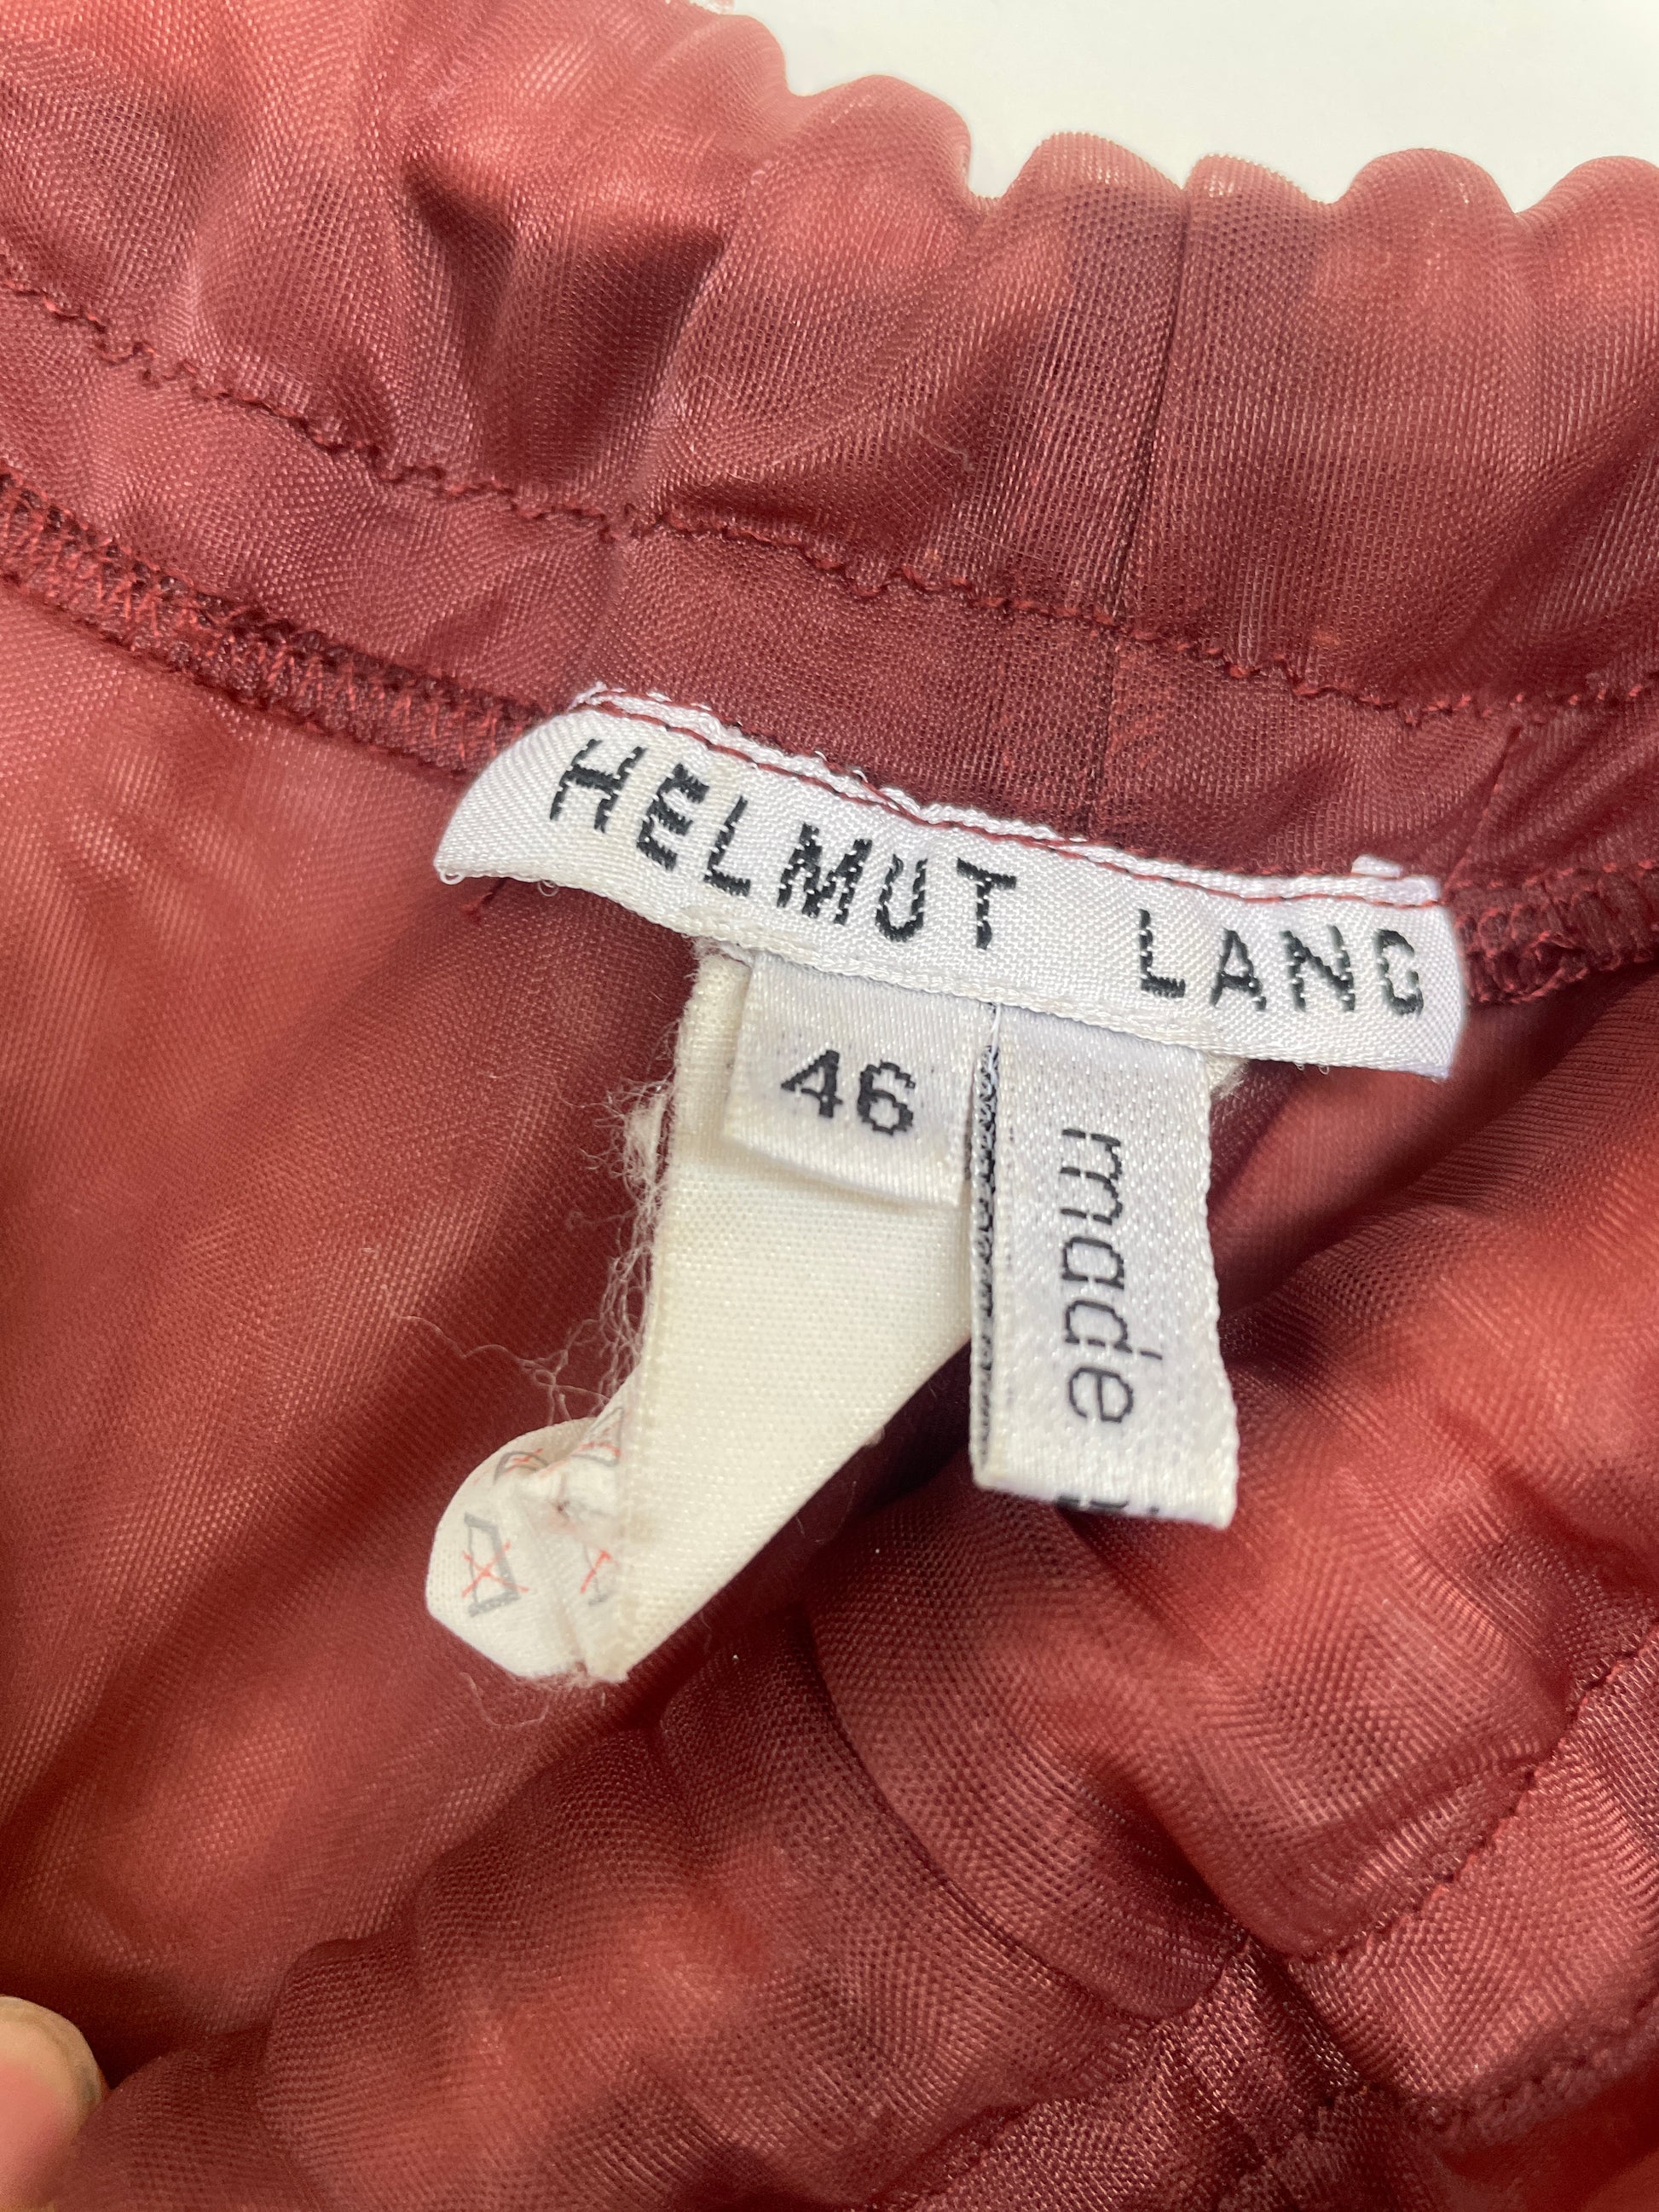 The Red List  Helmut lang, Helmut lang 90s, Fashion